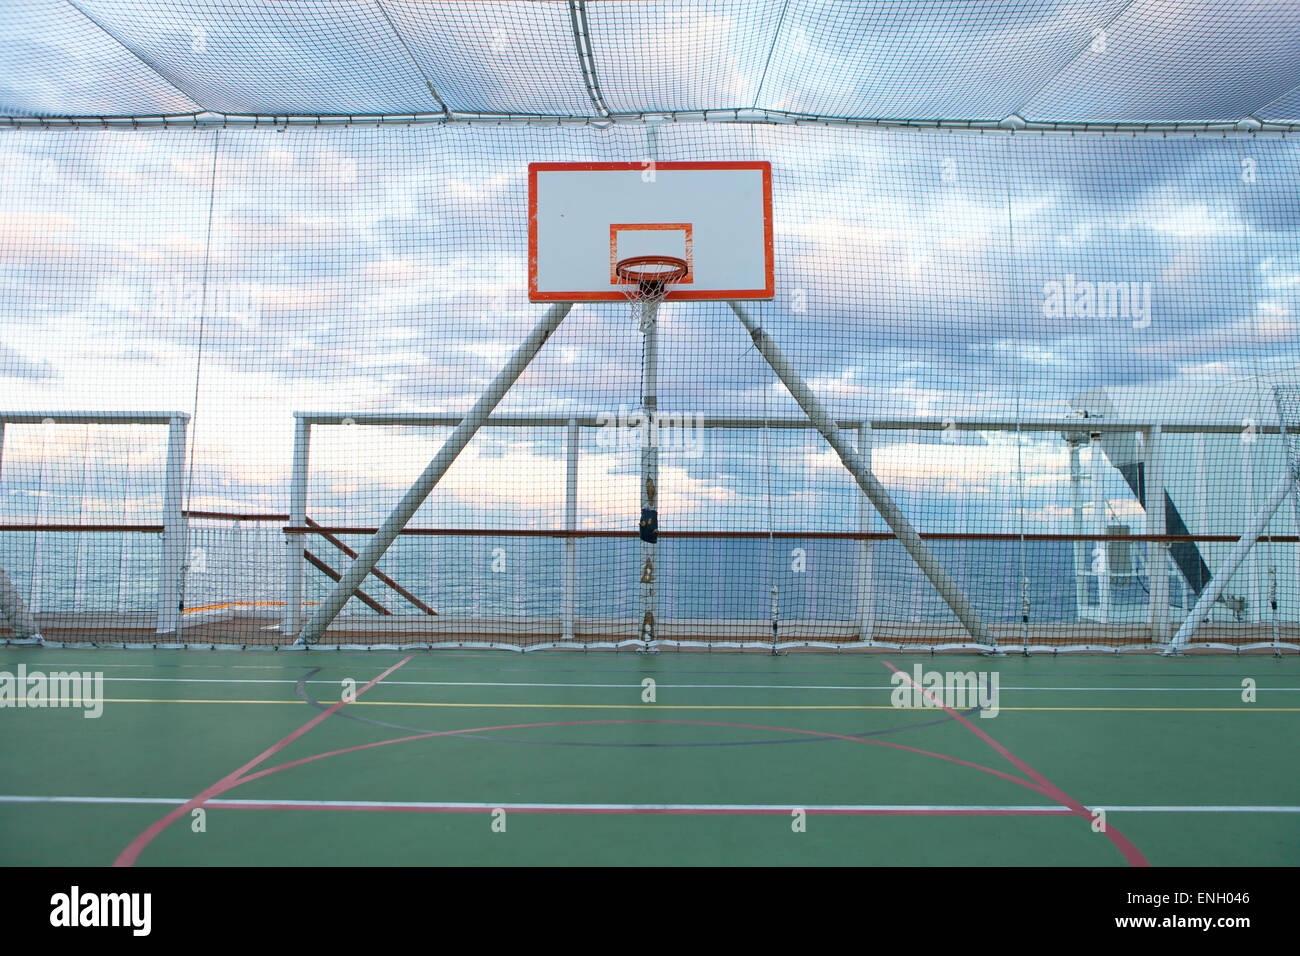 Netted Basketball Court Stock Photo